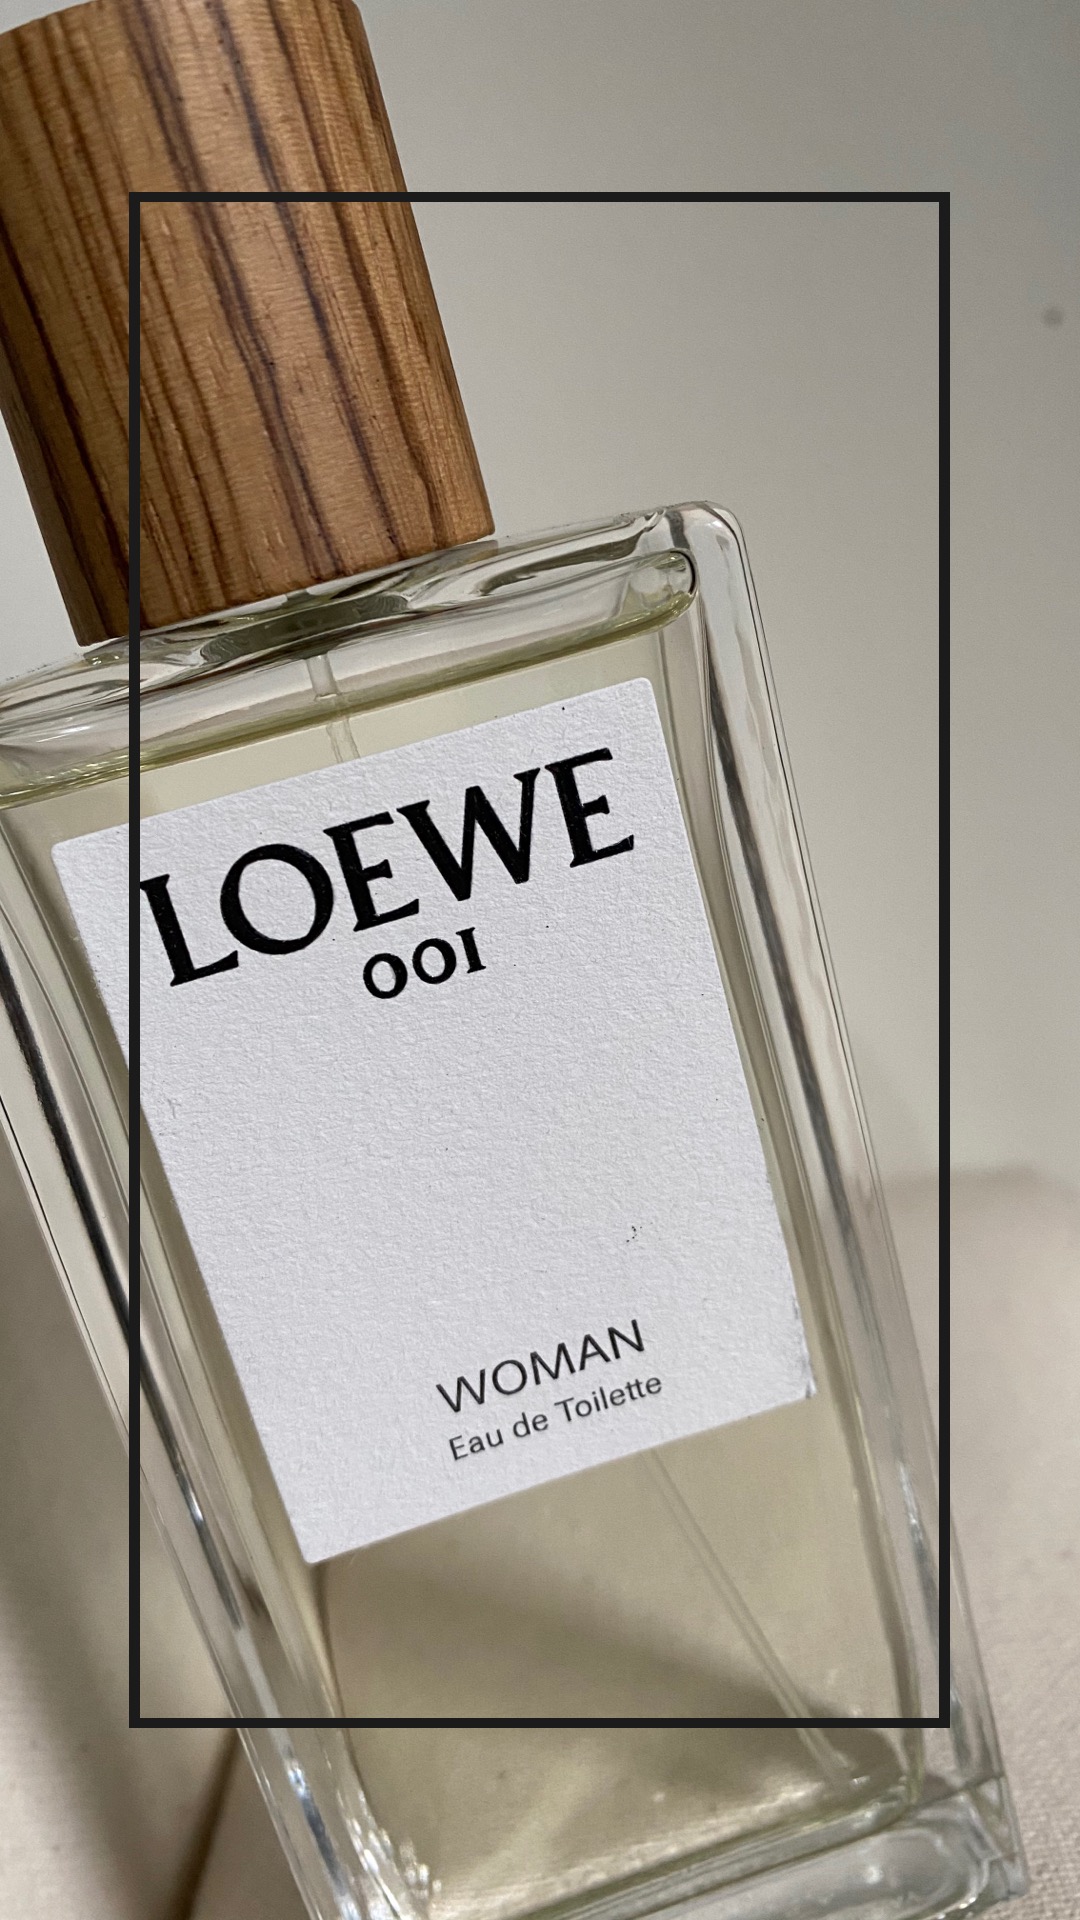 Loewe Fragrance 001 Woman and 001 Man: A quick review — Covet